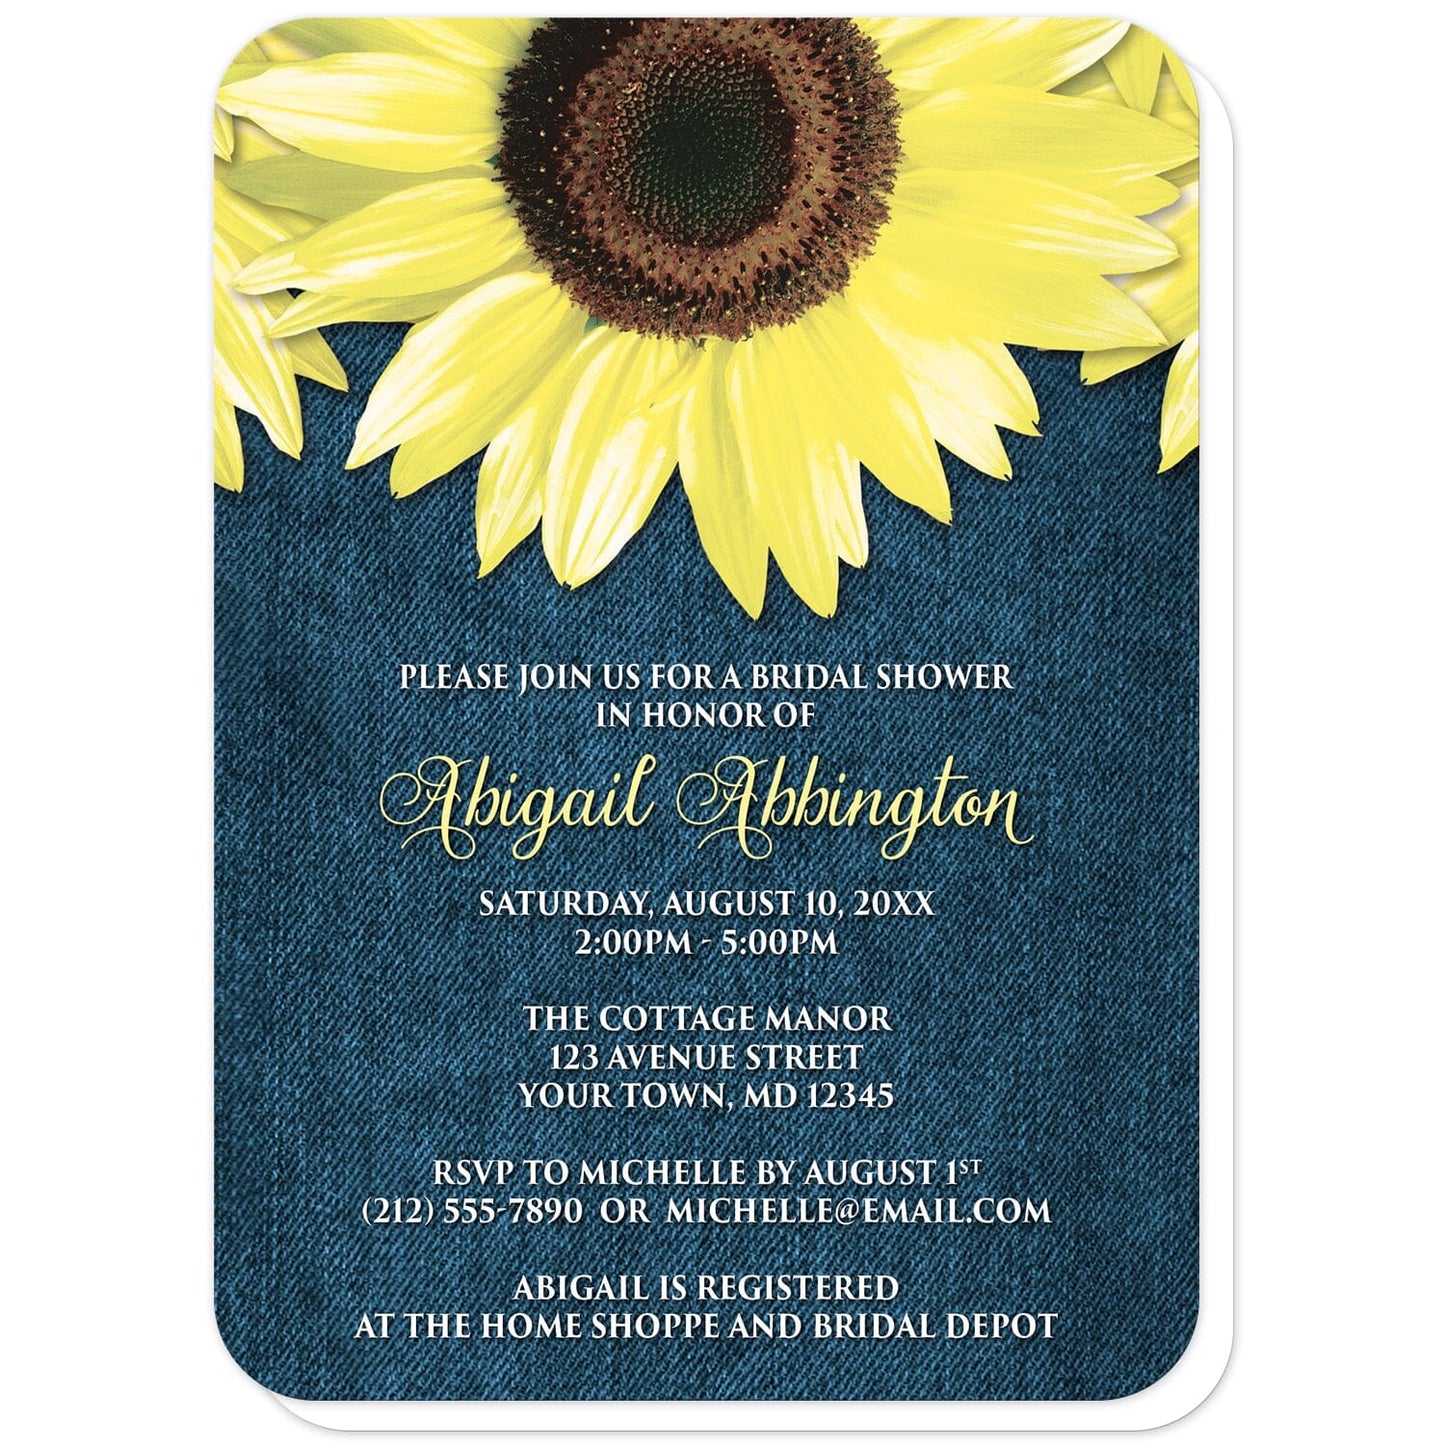 Rustic Sunflower and Denim Bridal Shower Invitations (with rounded corners) at Artistically Invited. Southern-inspired rustic sunflower and denim bridal shower invitations designed with large yellow sunflowers along the top over a country blue denim design. Your personalized bridal shower celebration details are custom printed in yellow and white over the blue denim background below the pretty sunflowers. 